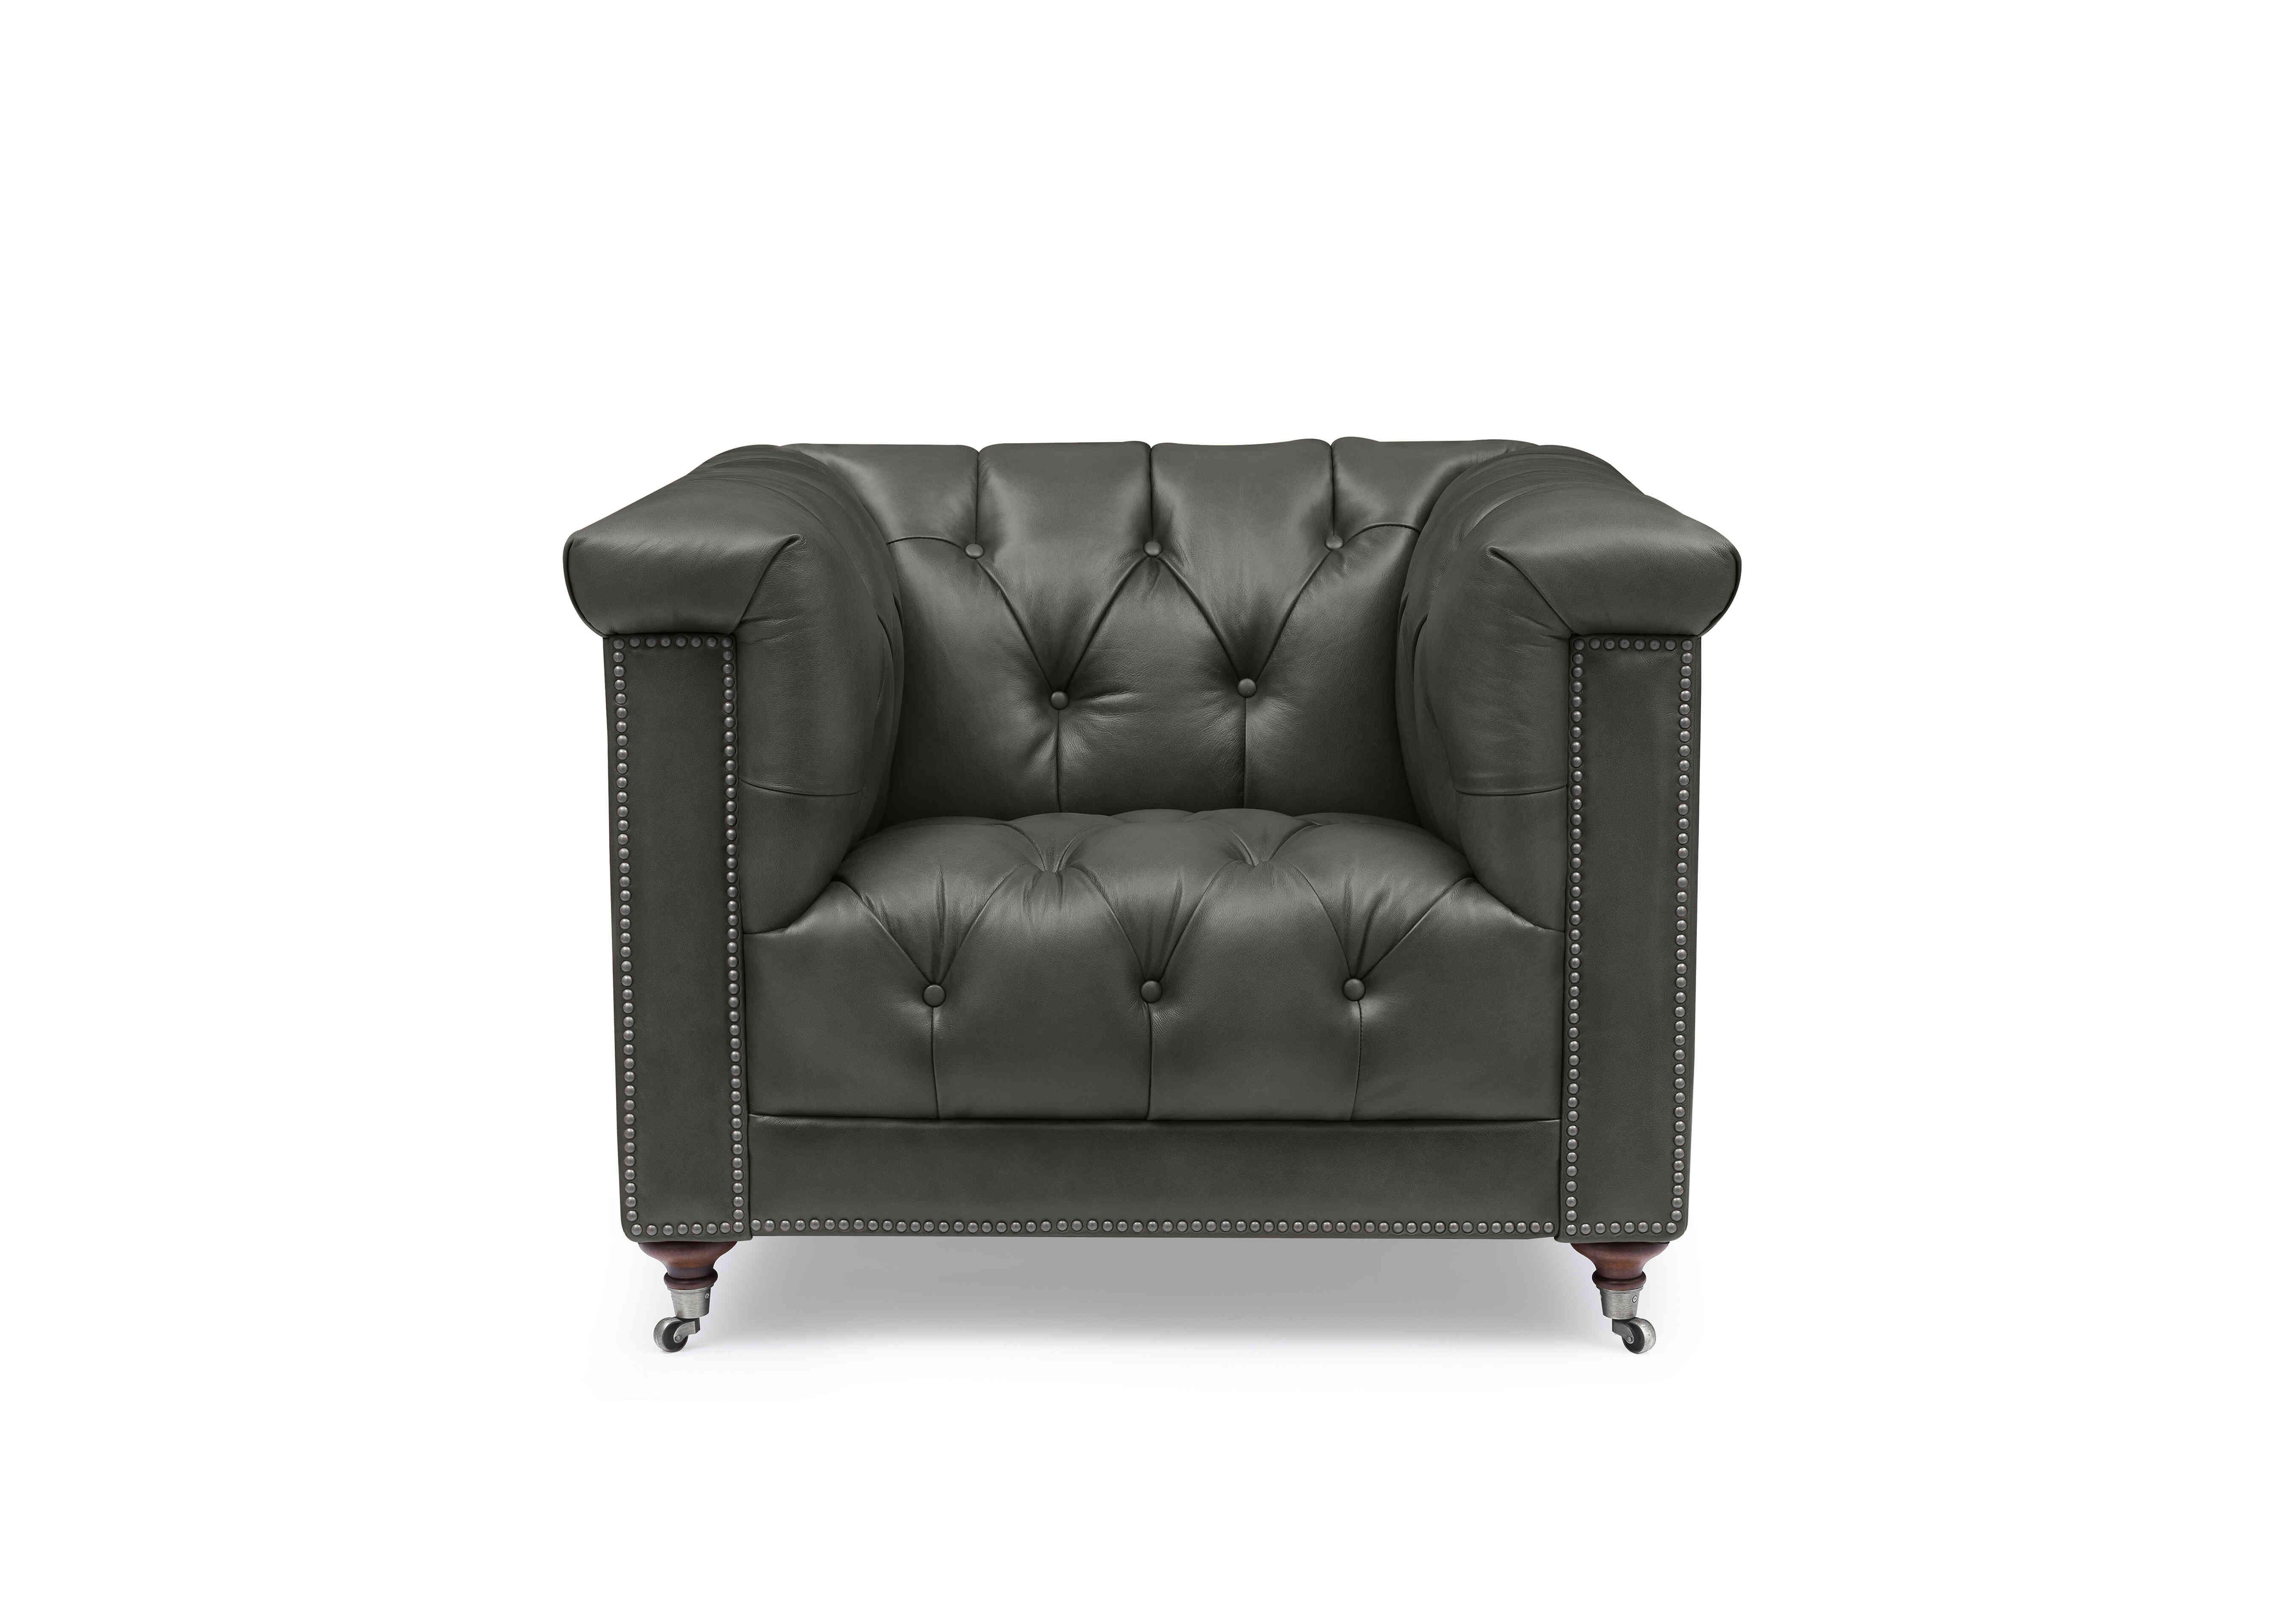 Wallace Leather Chesterfield Chair in X3y2-1966ls Granite on Furniture Village